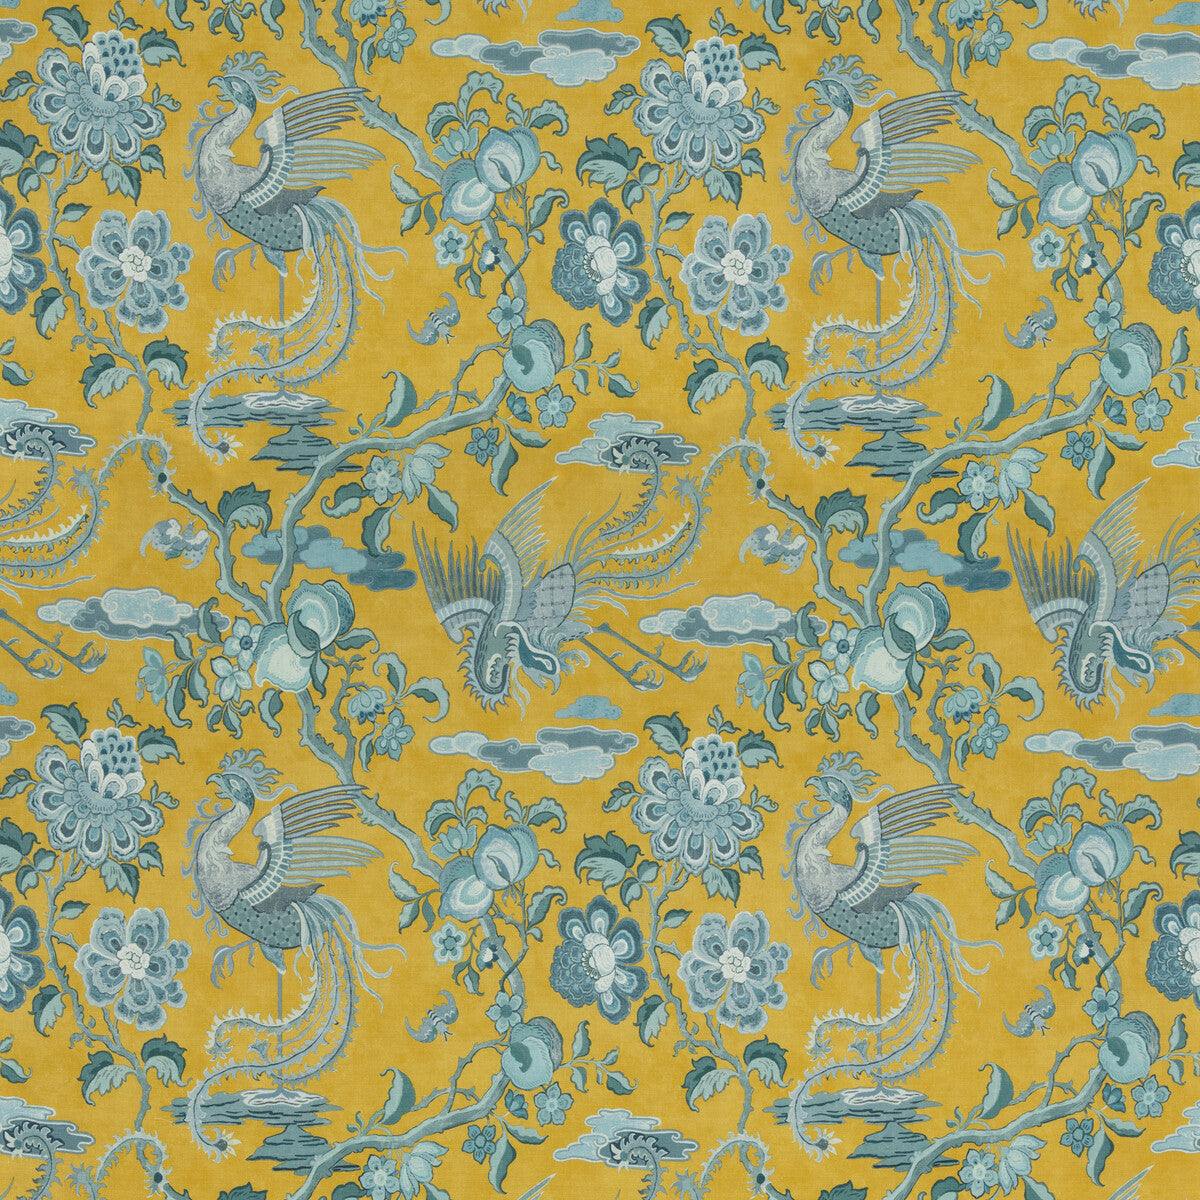 Chifu fabric in ochre/blue color - pattern BP10852.2.0 - by G P &amp; J Baker in the Chifu collection